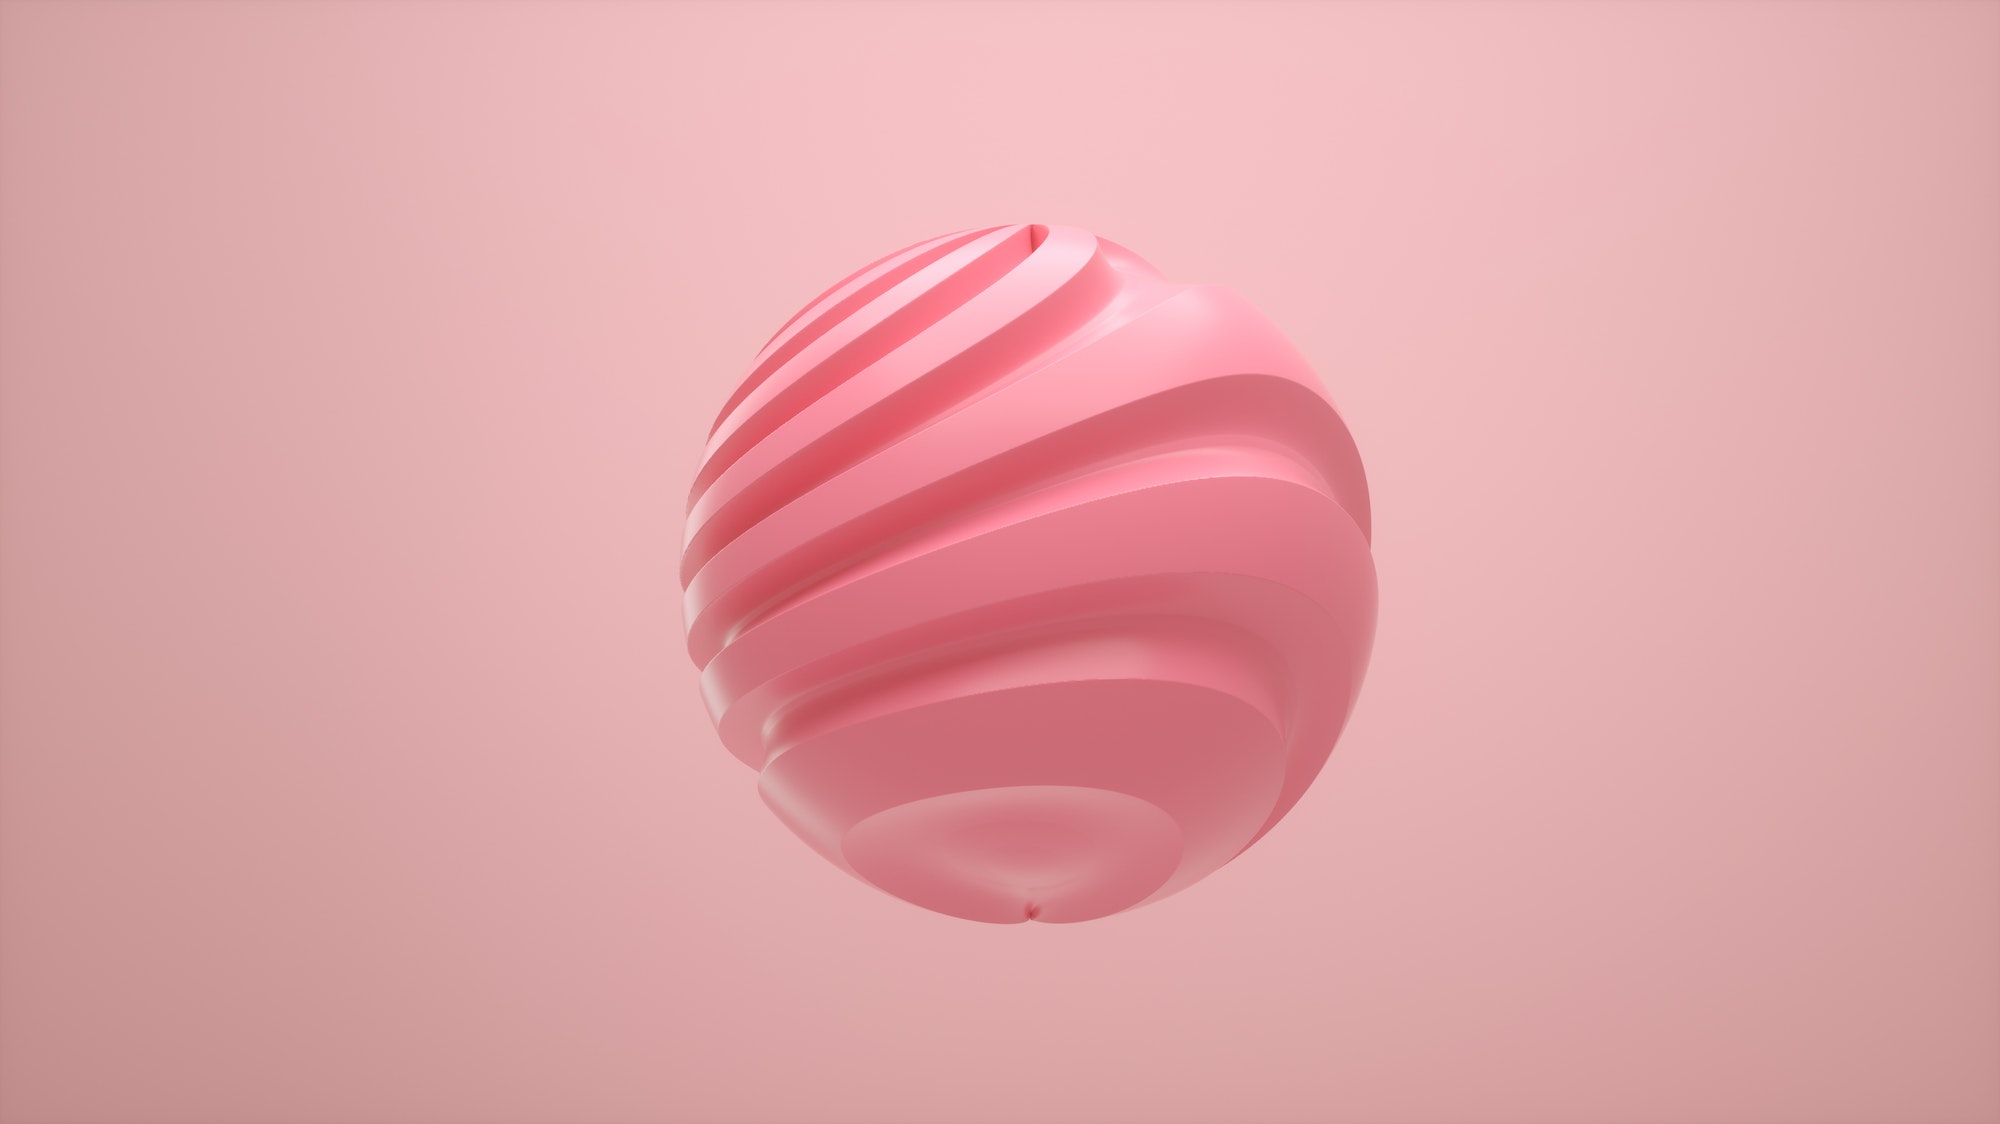 pastel-colored-sphere-with-twisted-lines-on-an-isolated-background-minimalist-design.jpg